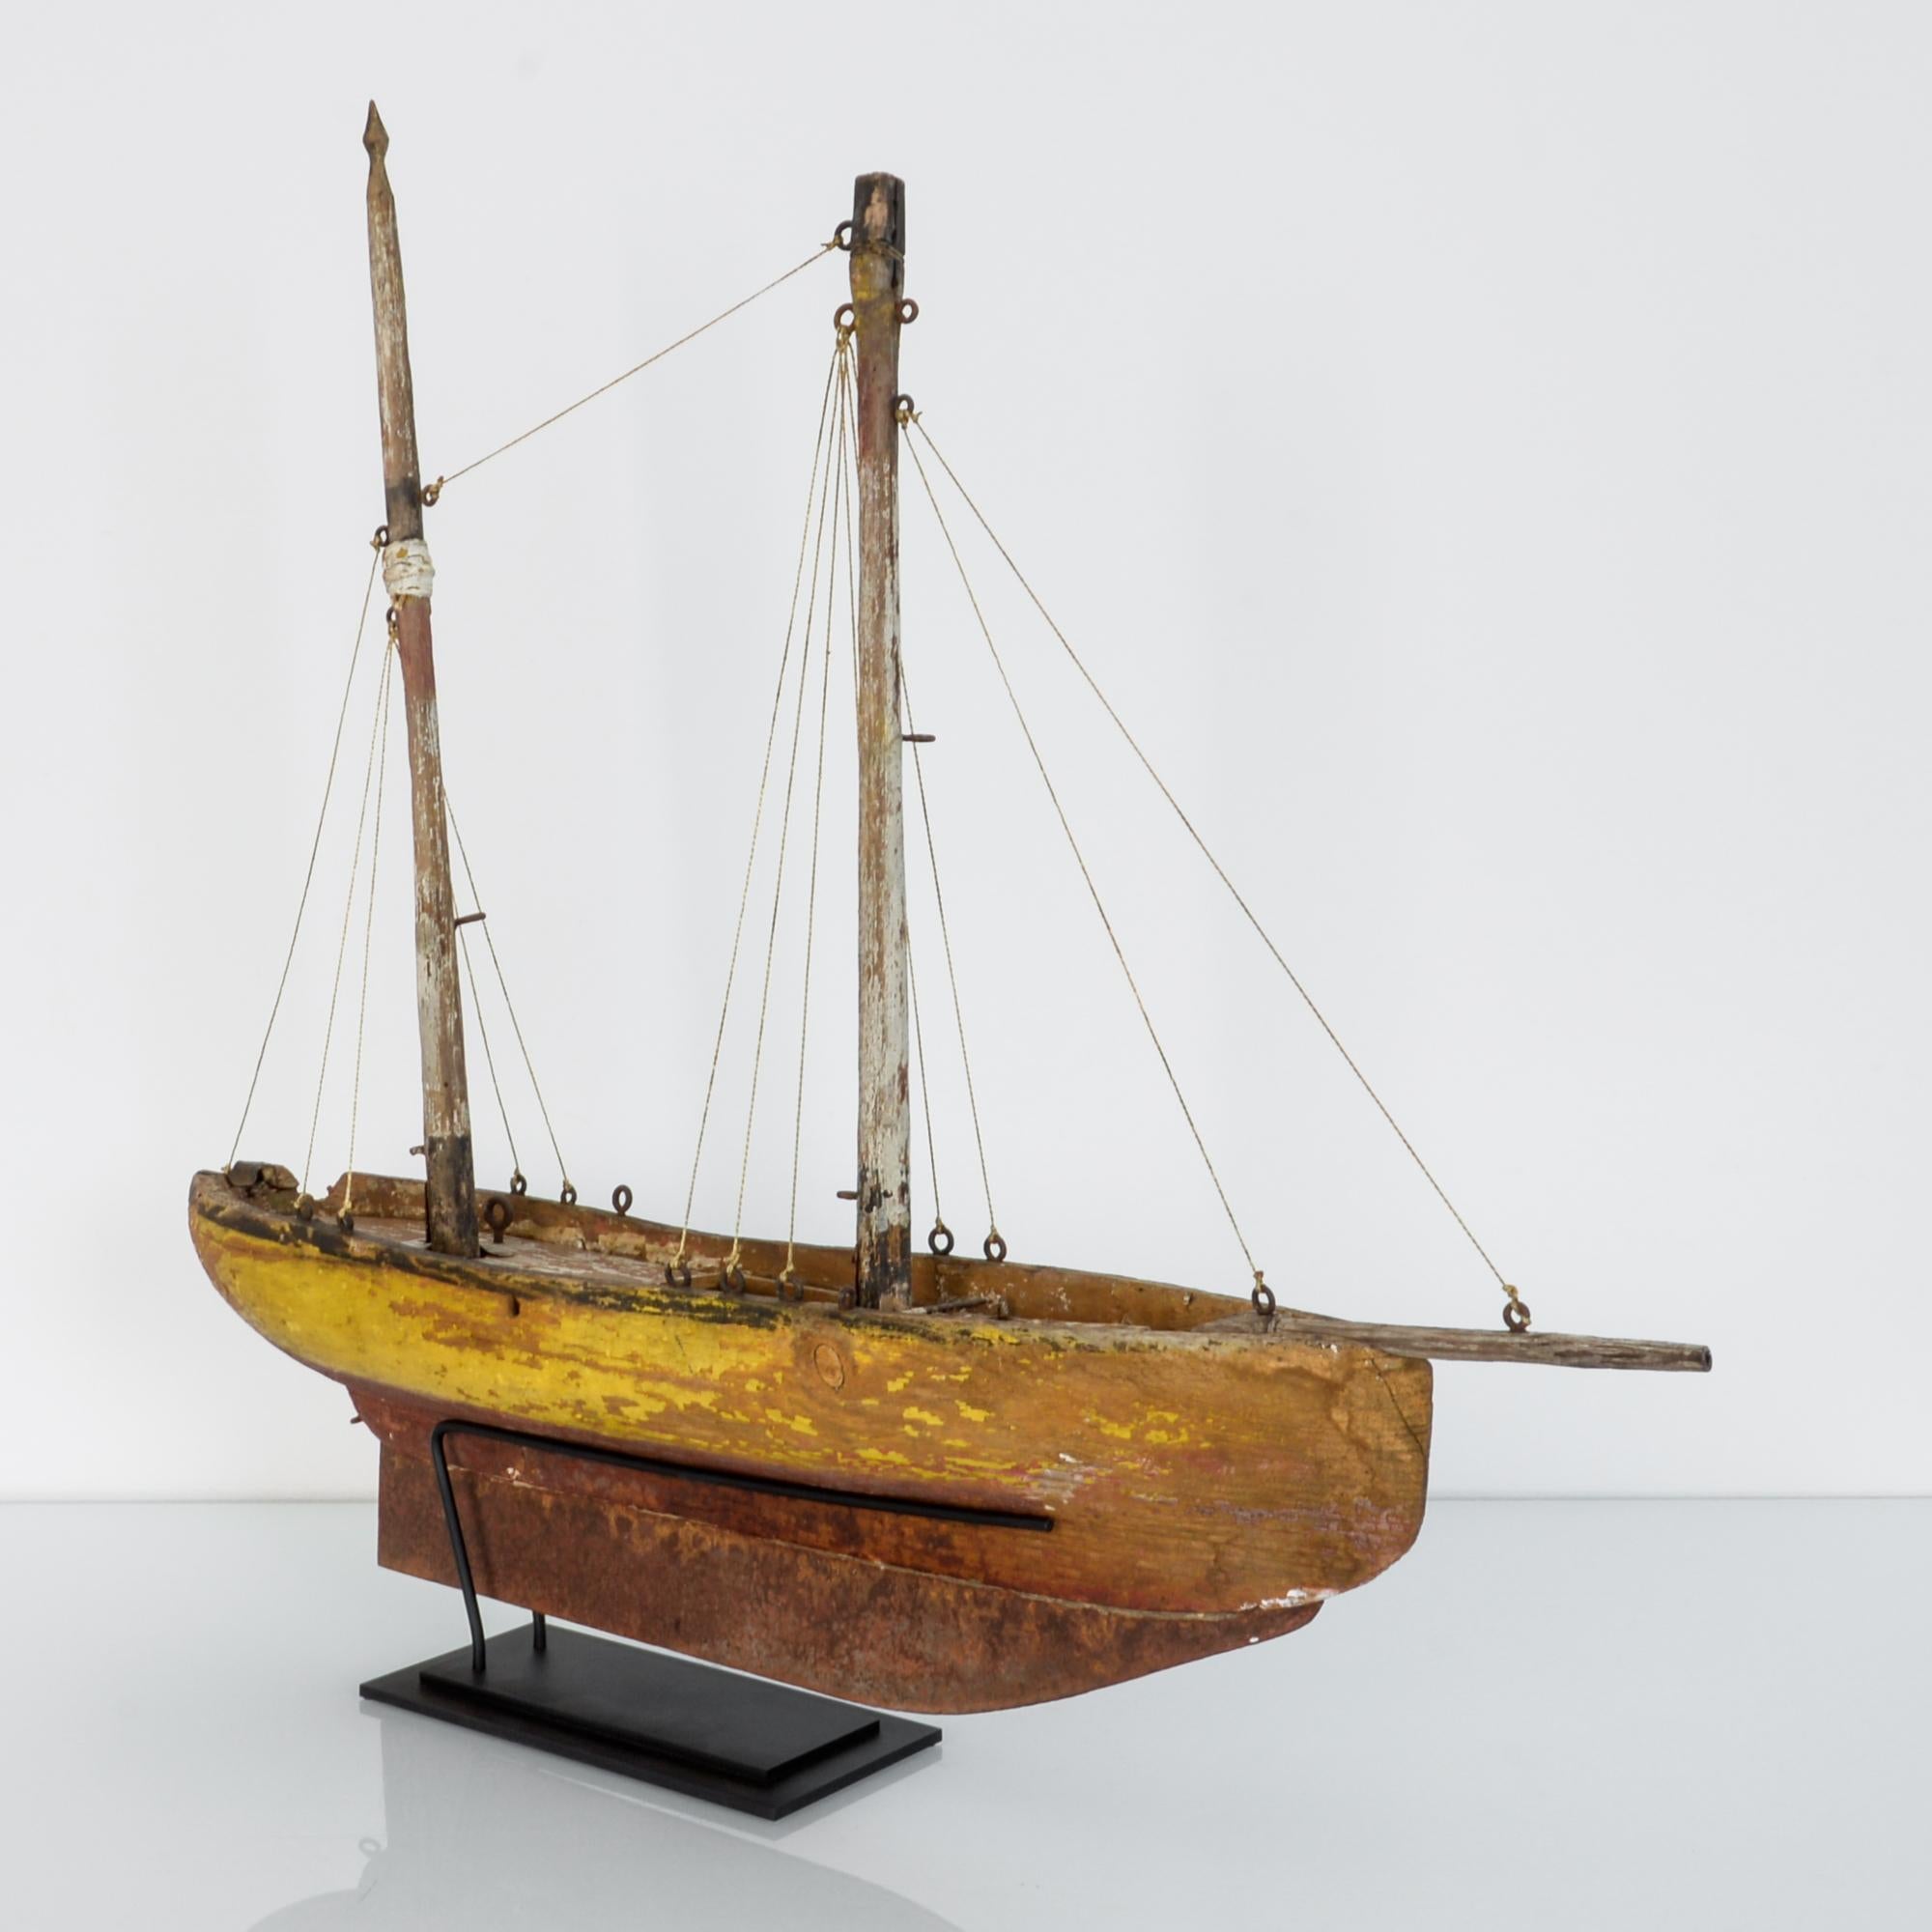 From bow to stern, this vintage nautical miniature makes a whimsical decoration, circa 1950 France, made from rustic materials with refined details, in soft wood, hobby paint, wires, hooks and string, amazing texture.